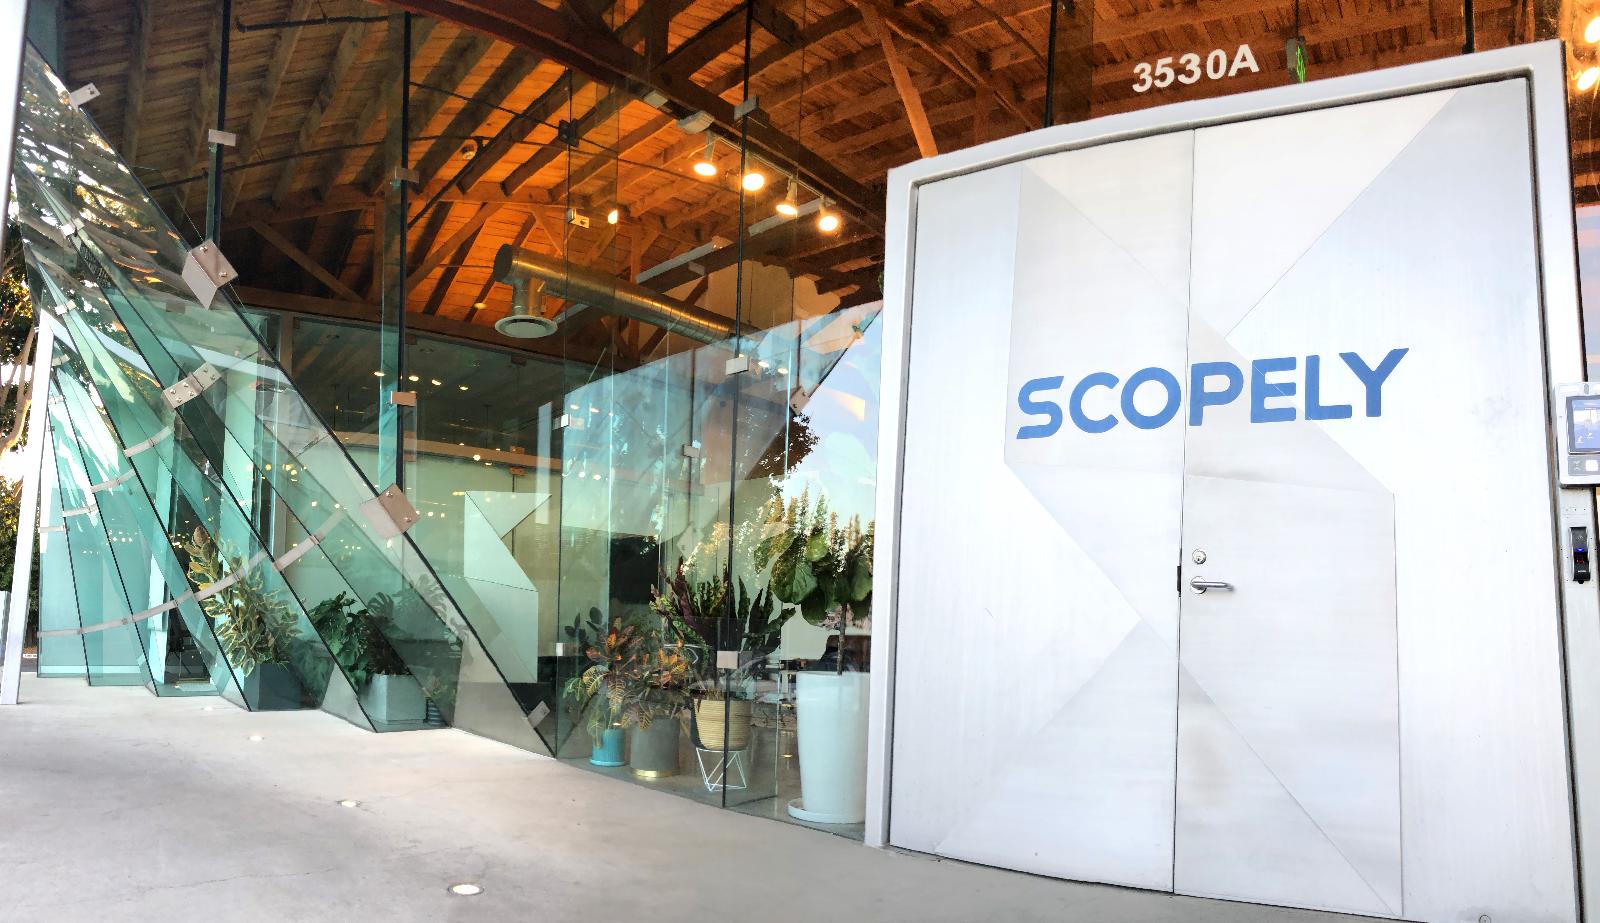 Saudi’s Savvy Games Group to acquire mobile games company Scopely for $4.9 billion